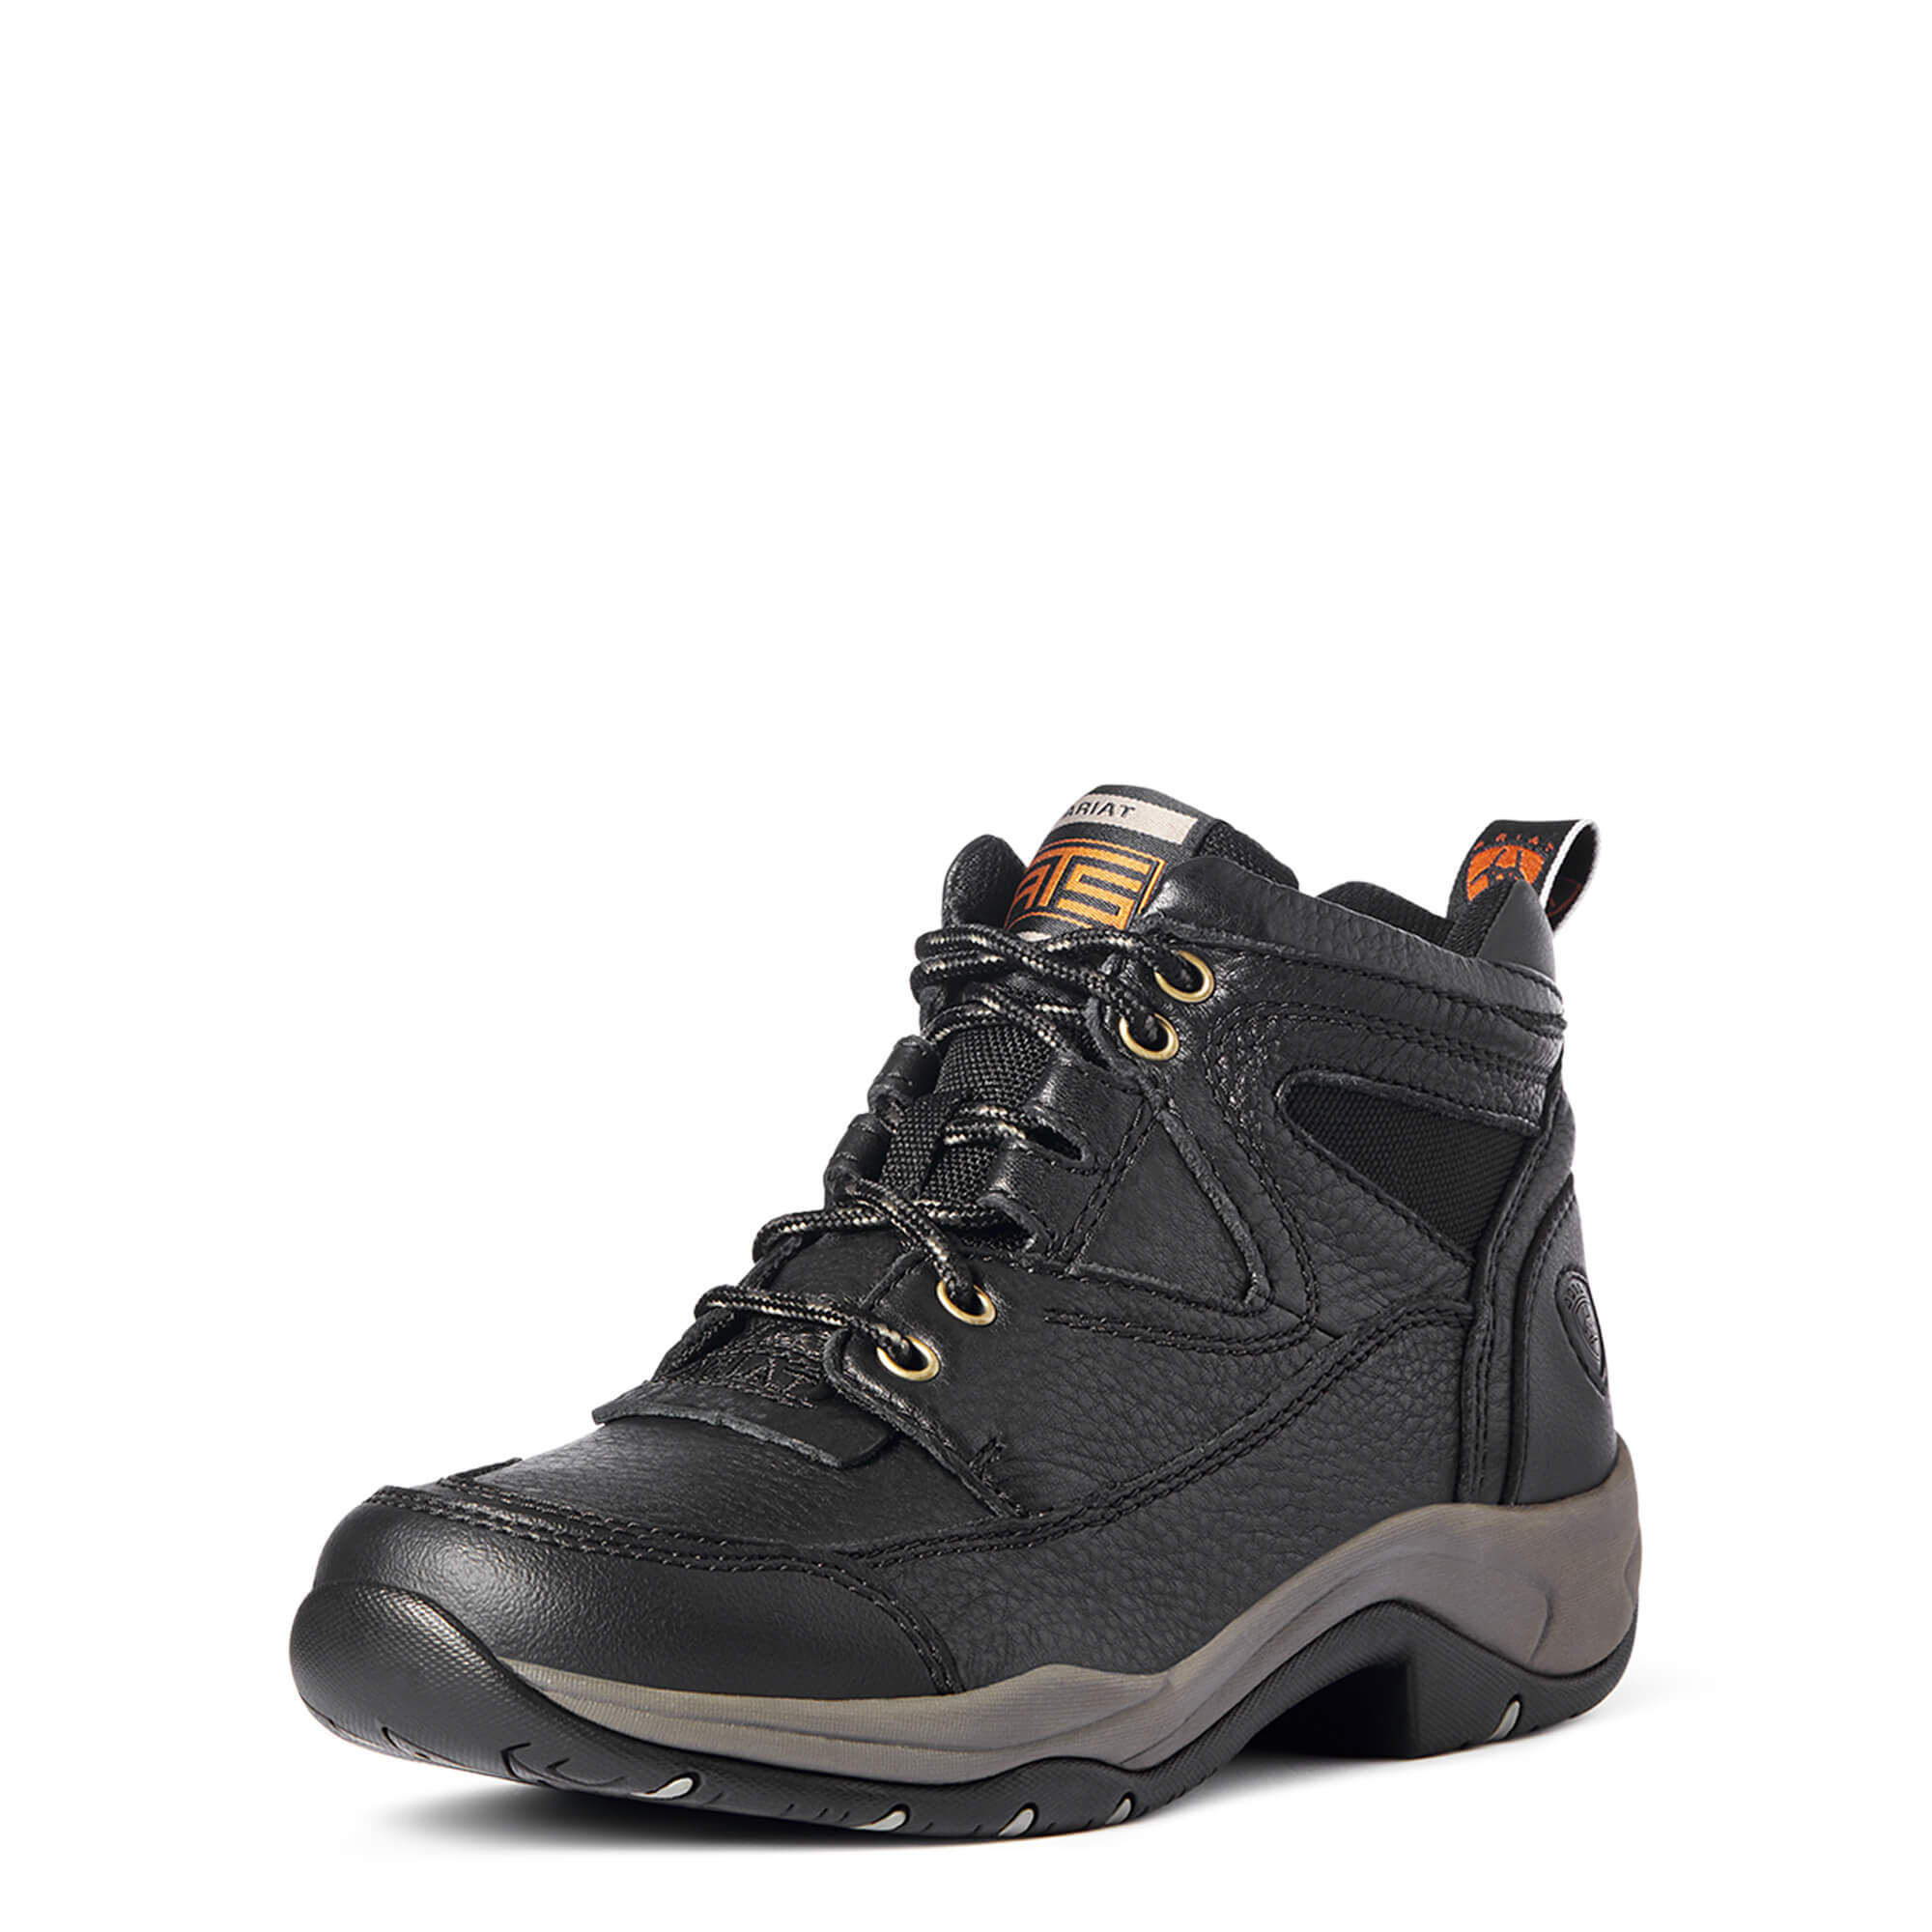 Women's Terrain Boots in Black Leather  by Ariat